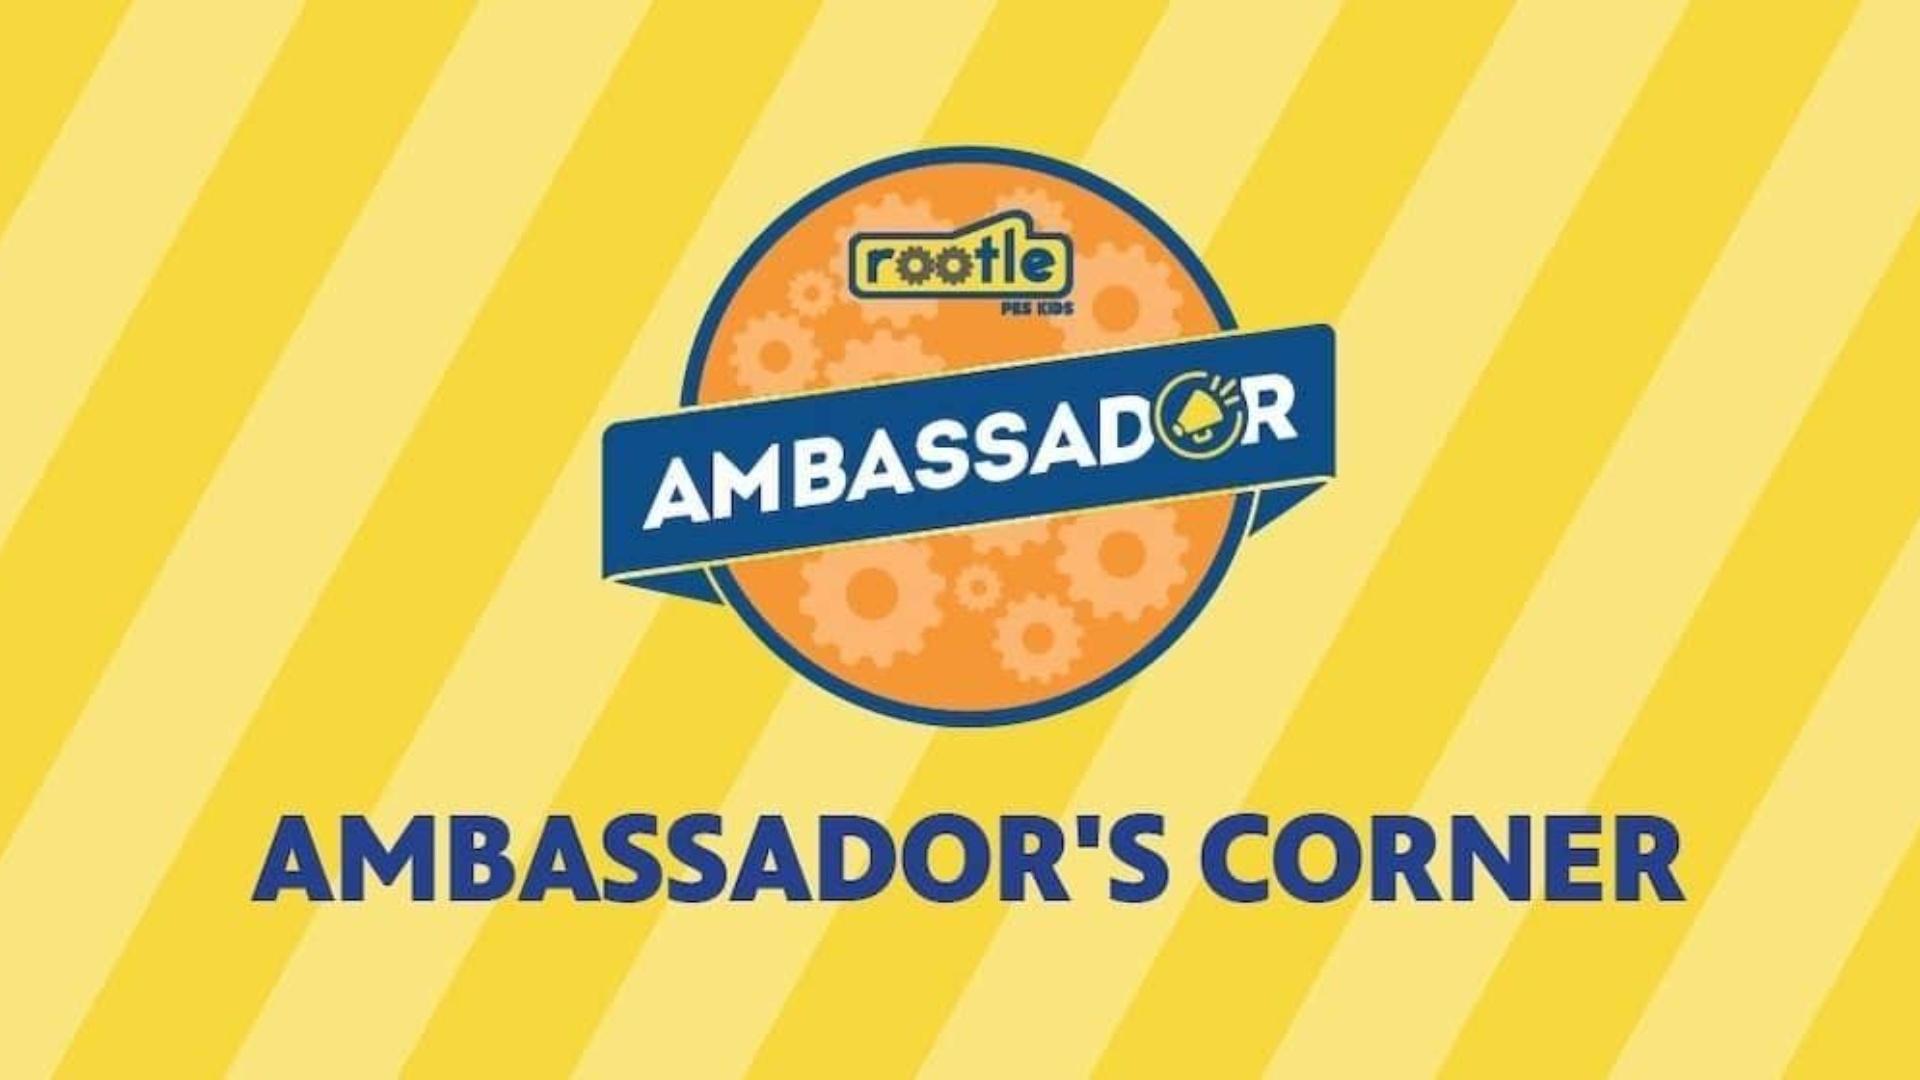 Rootle Ambassador logo with a dark and light yellow striped background and the words, "AMBASSADOR'S CORNER"